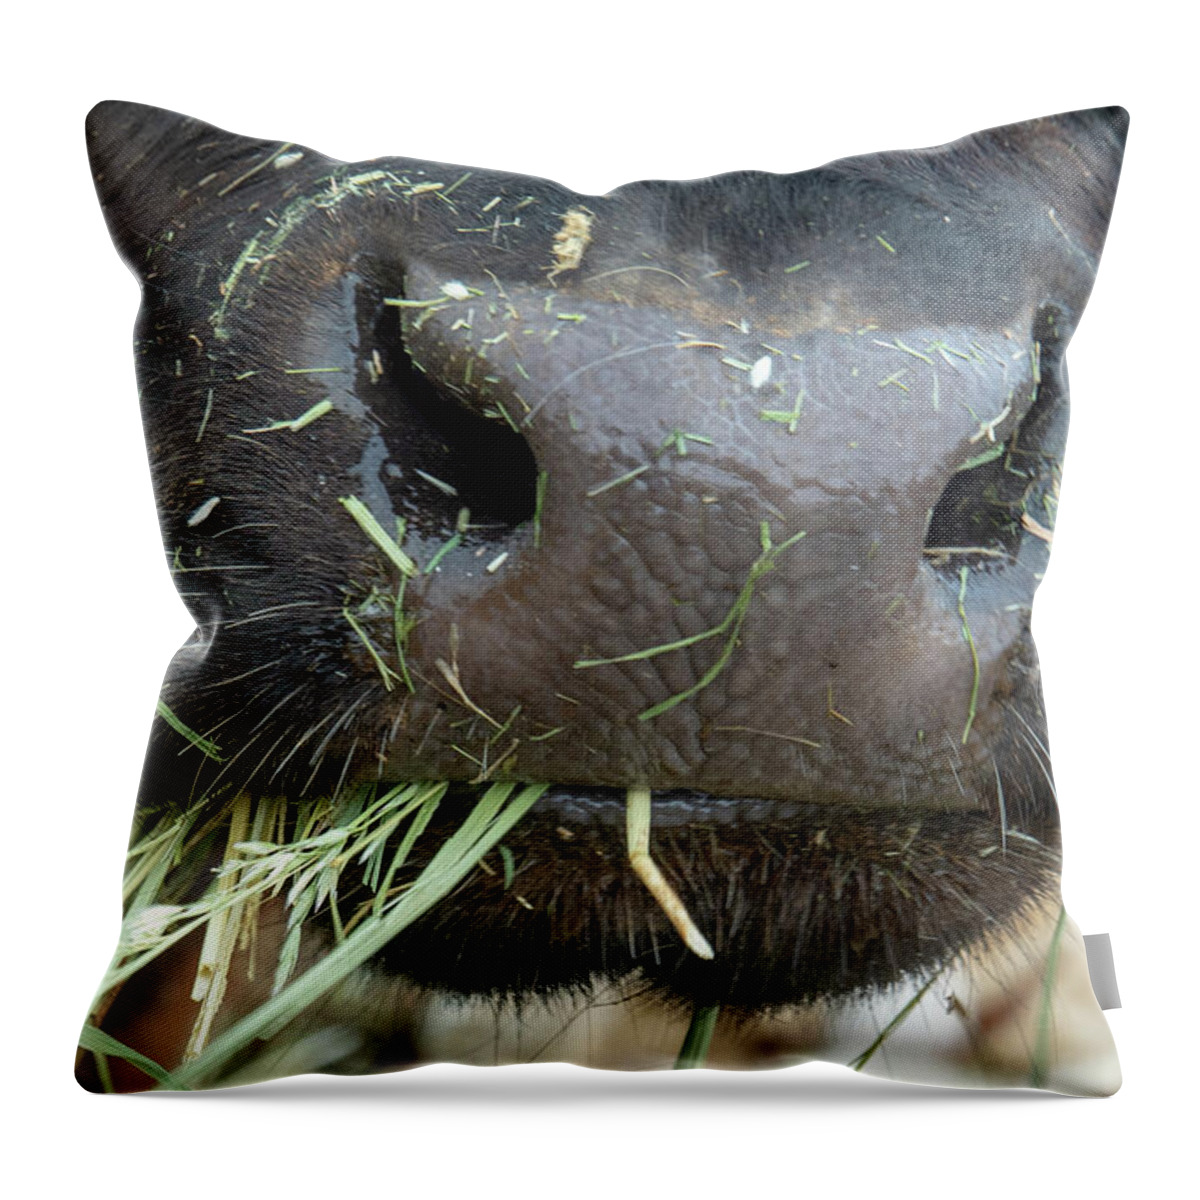 Cow Throw Pillow featuring the photograph Oh, Barnyard Smells by Leslie Struxness